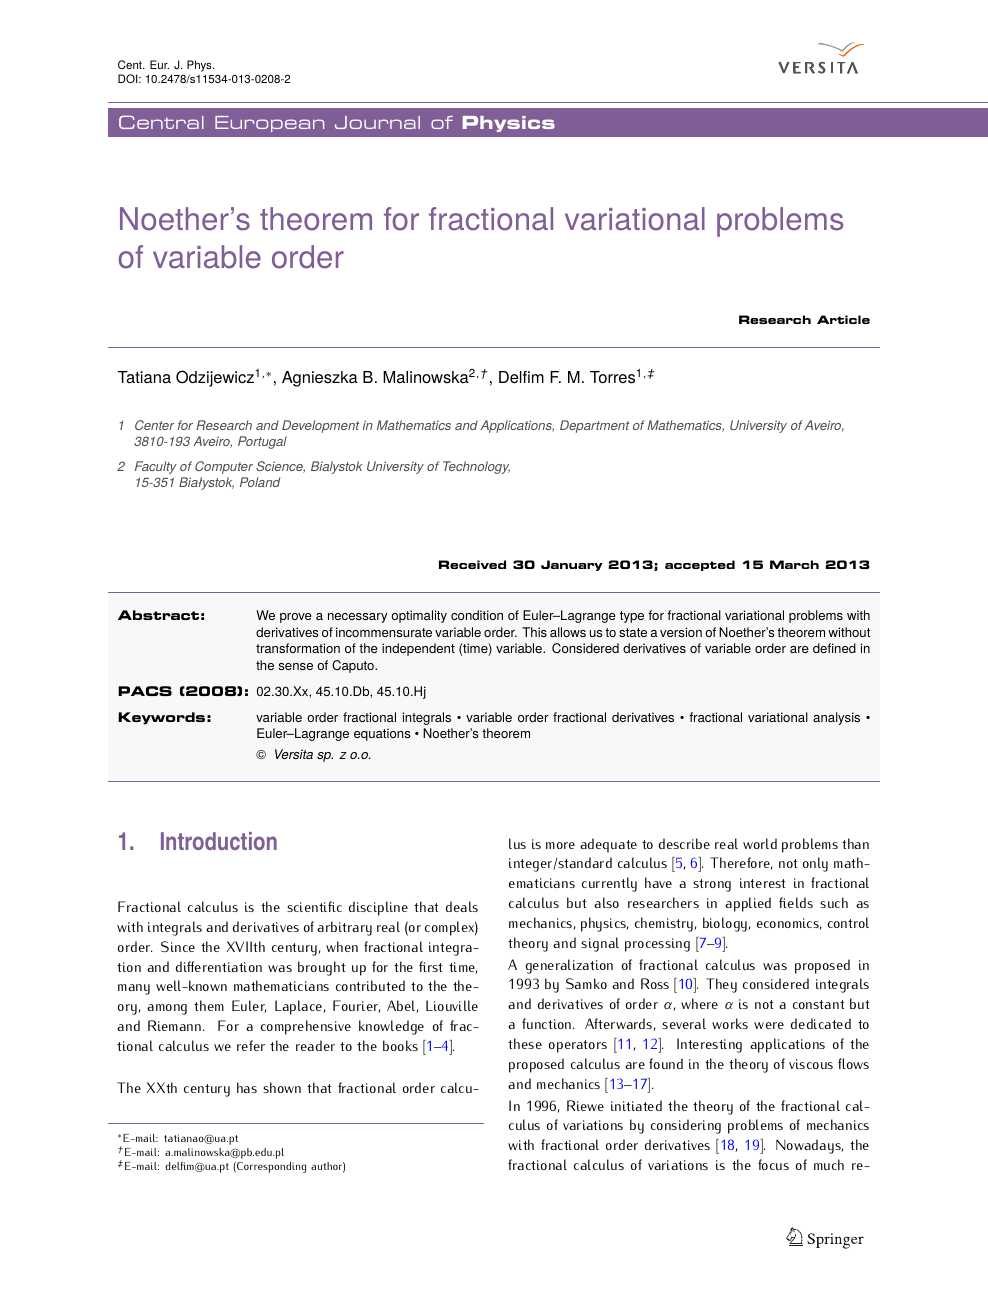 Noether S Theorem For Fractional Variational Problems Of Variable Order Topic Of Research Paper In Mathematics Download Scholarly Article Pdf And Read For Free On Cyberleninka Open Science Hub